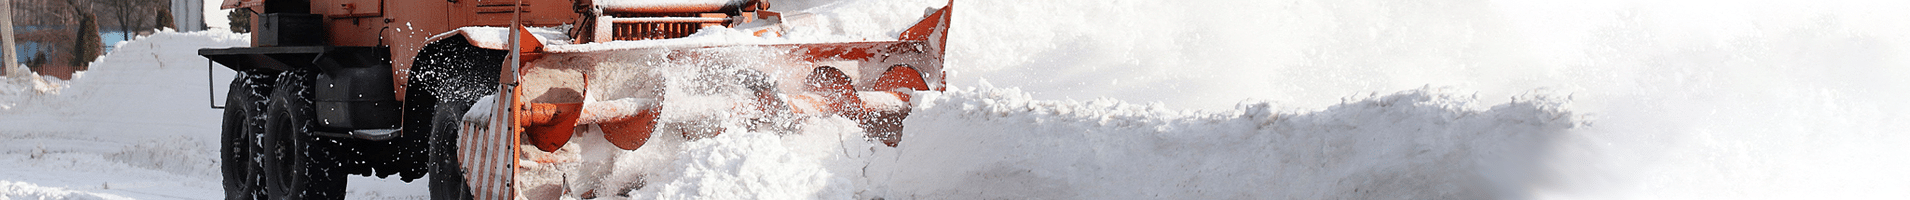 Green's Lawncare & Property Services Expert Snow Removal